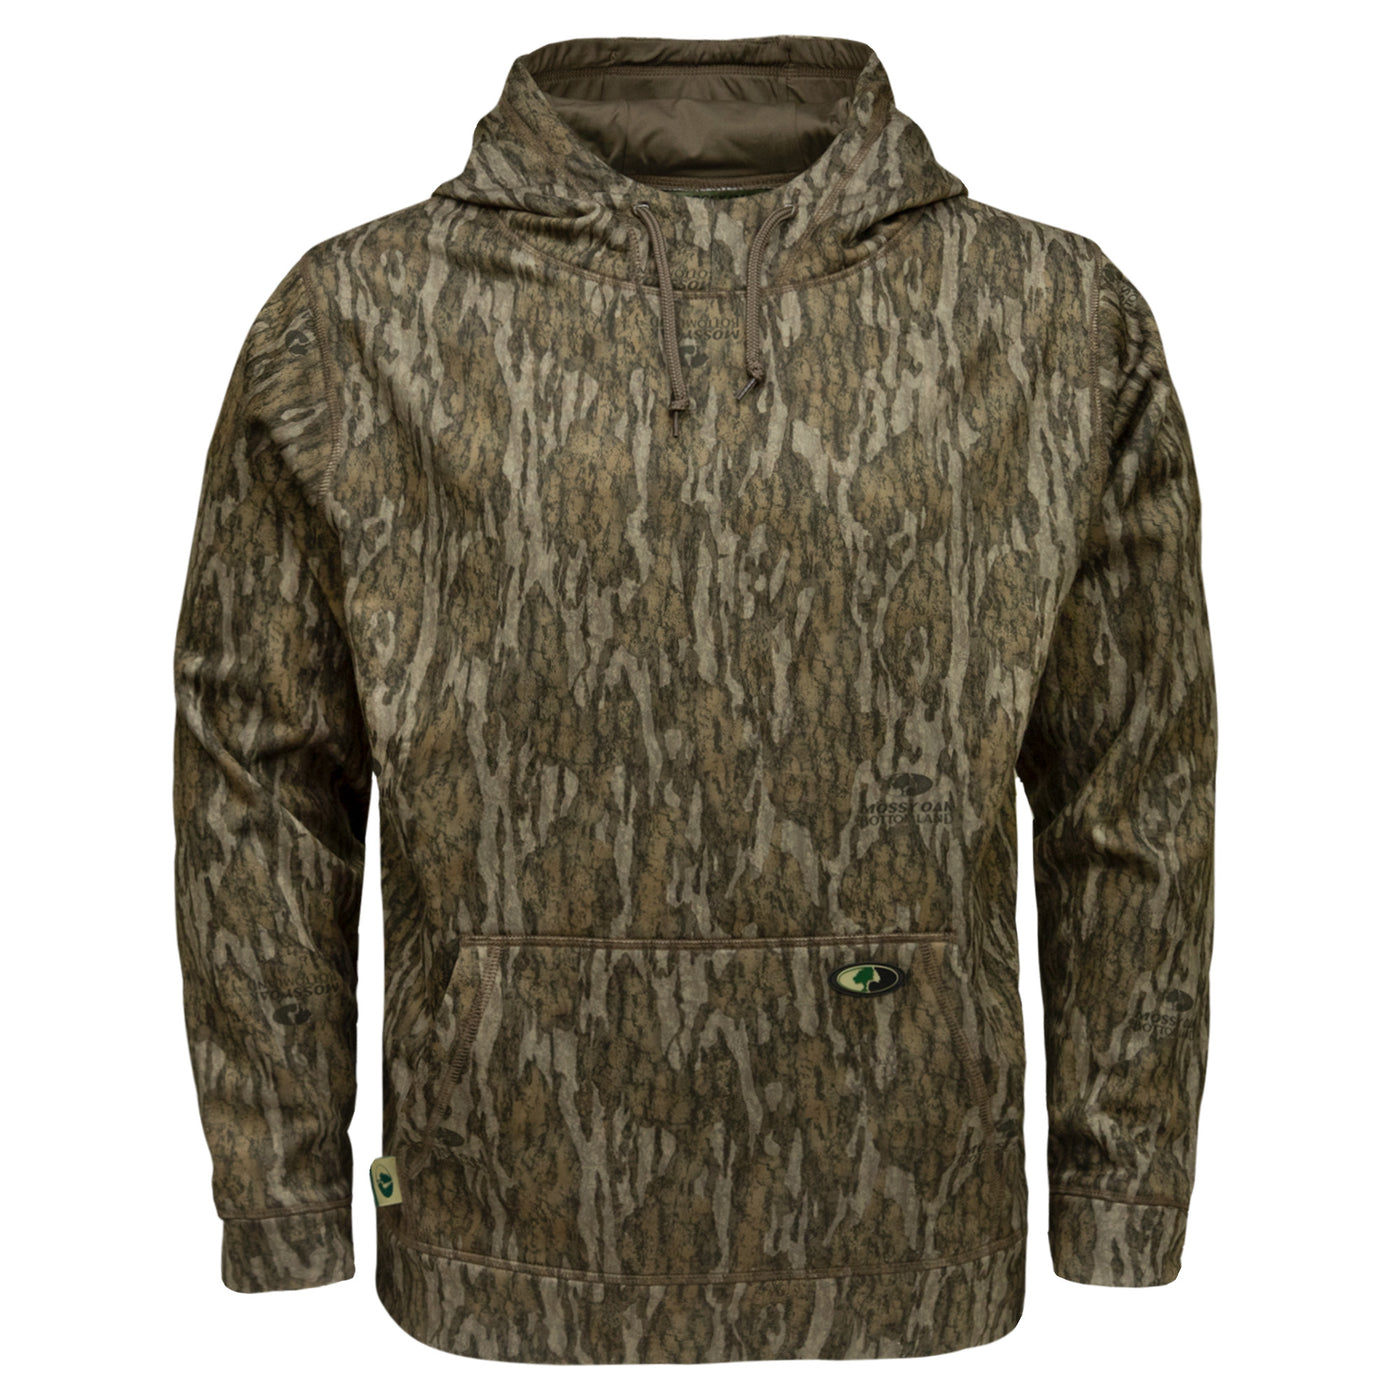 Mossy Oak Men's Camo Hoodie, Hunting Clothes